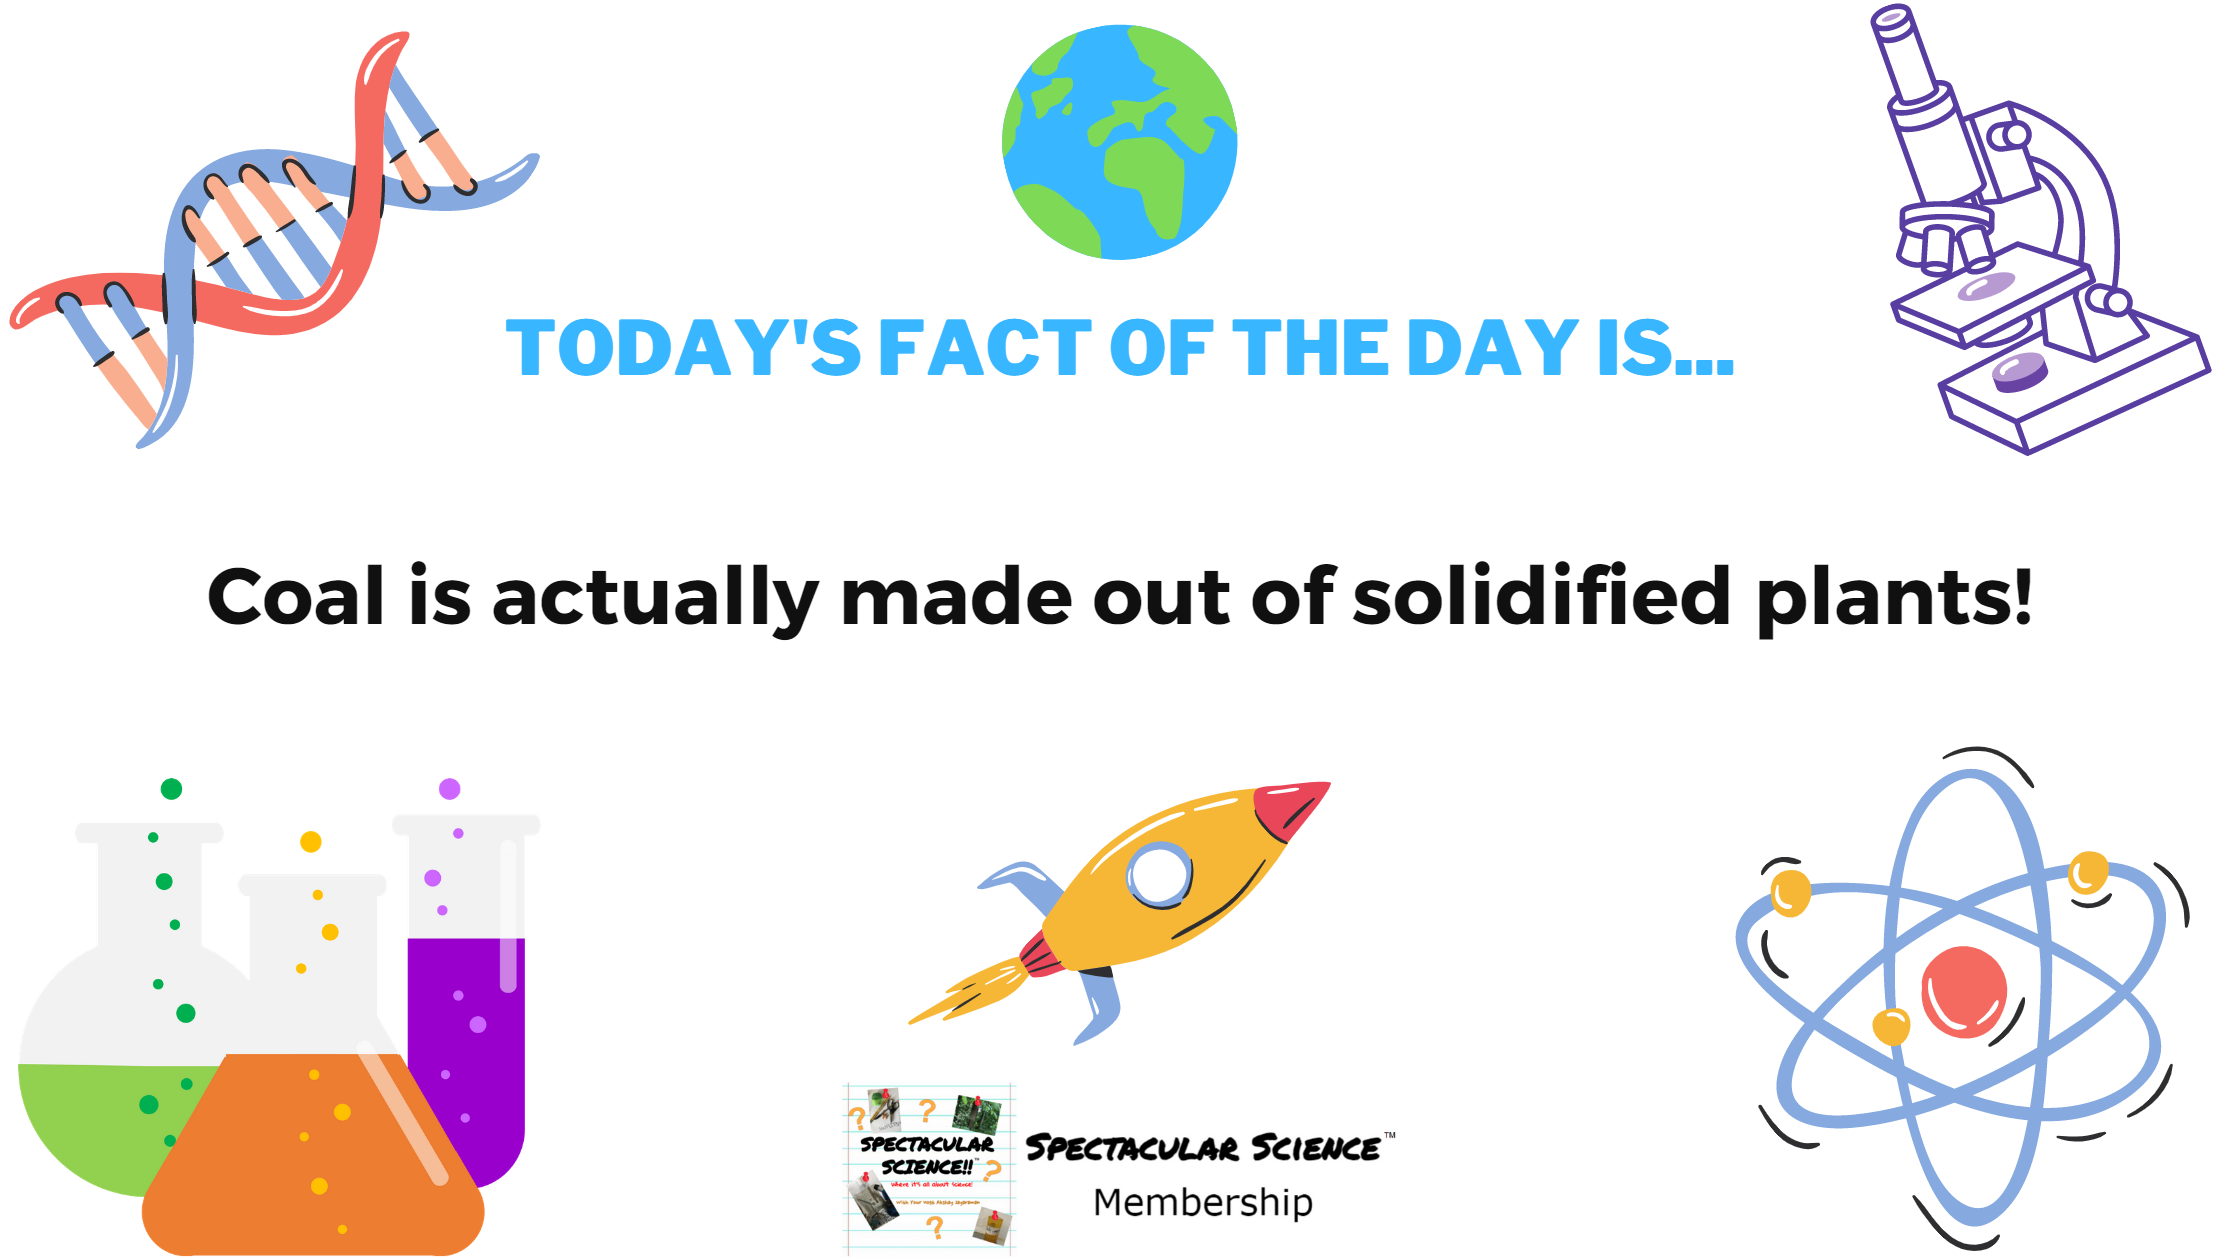 Fact of the Day Image May 16